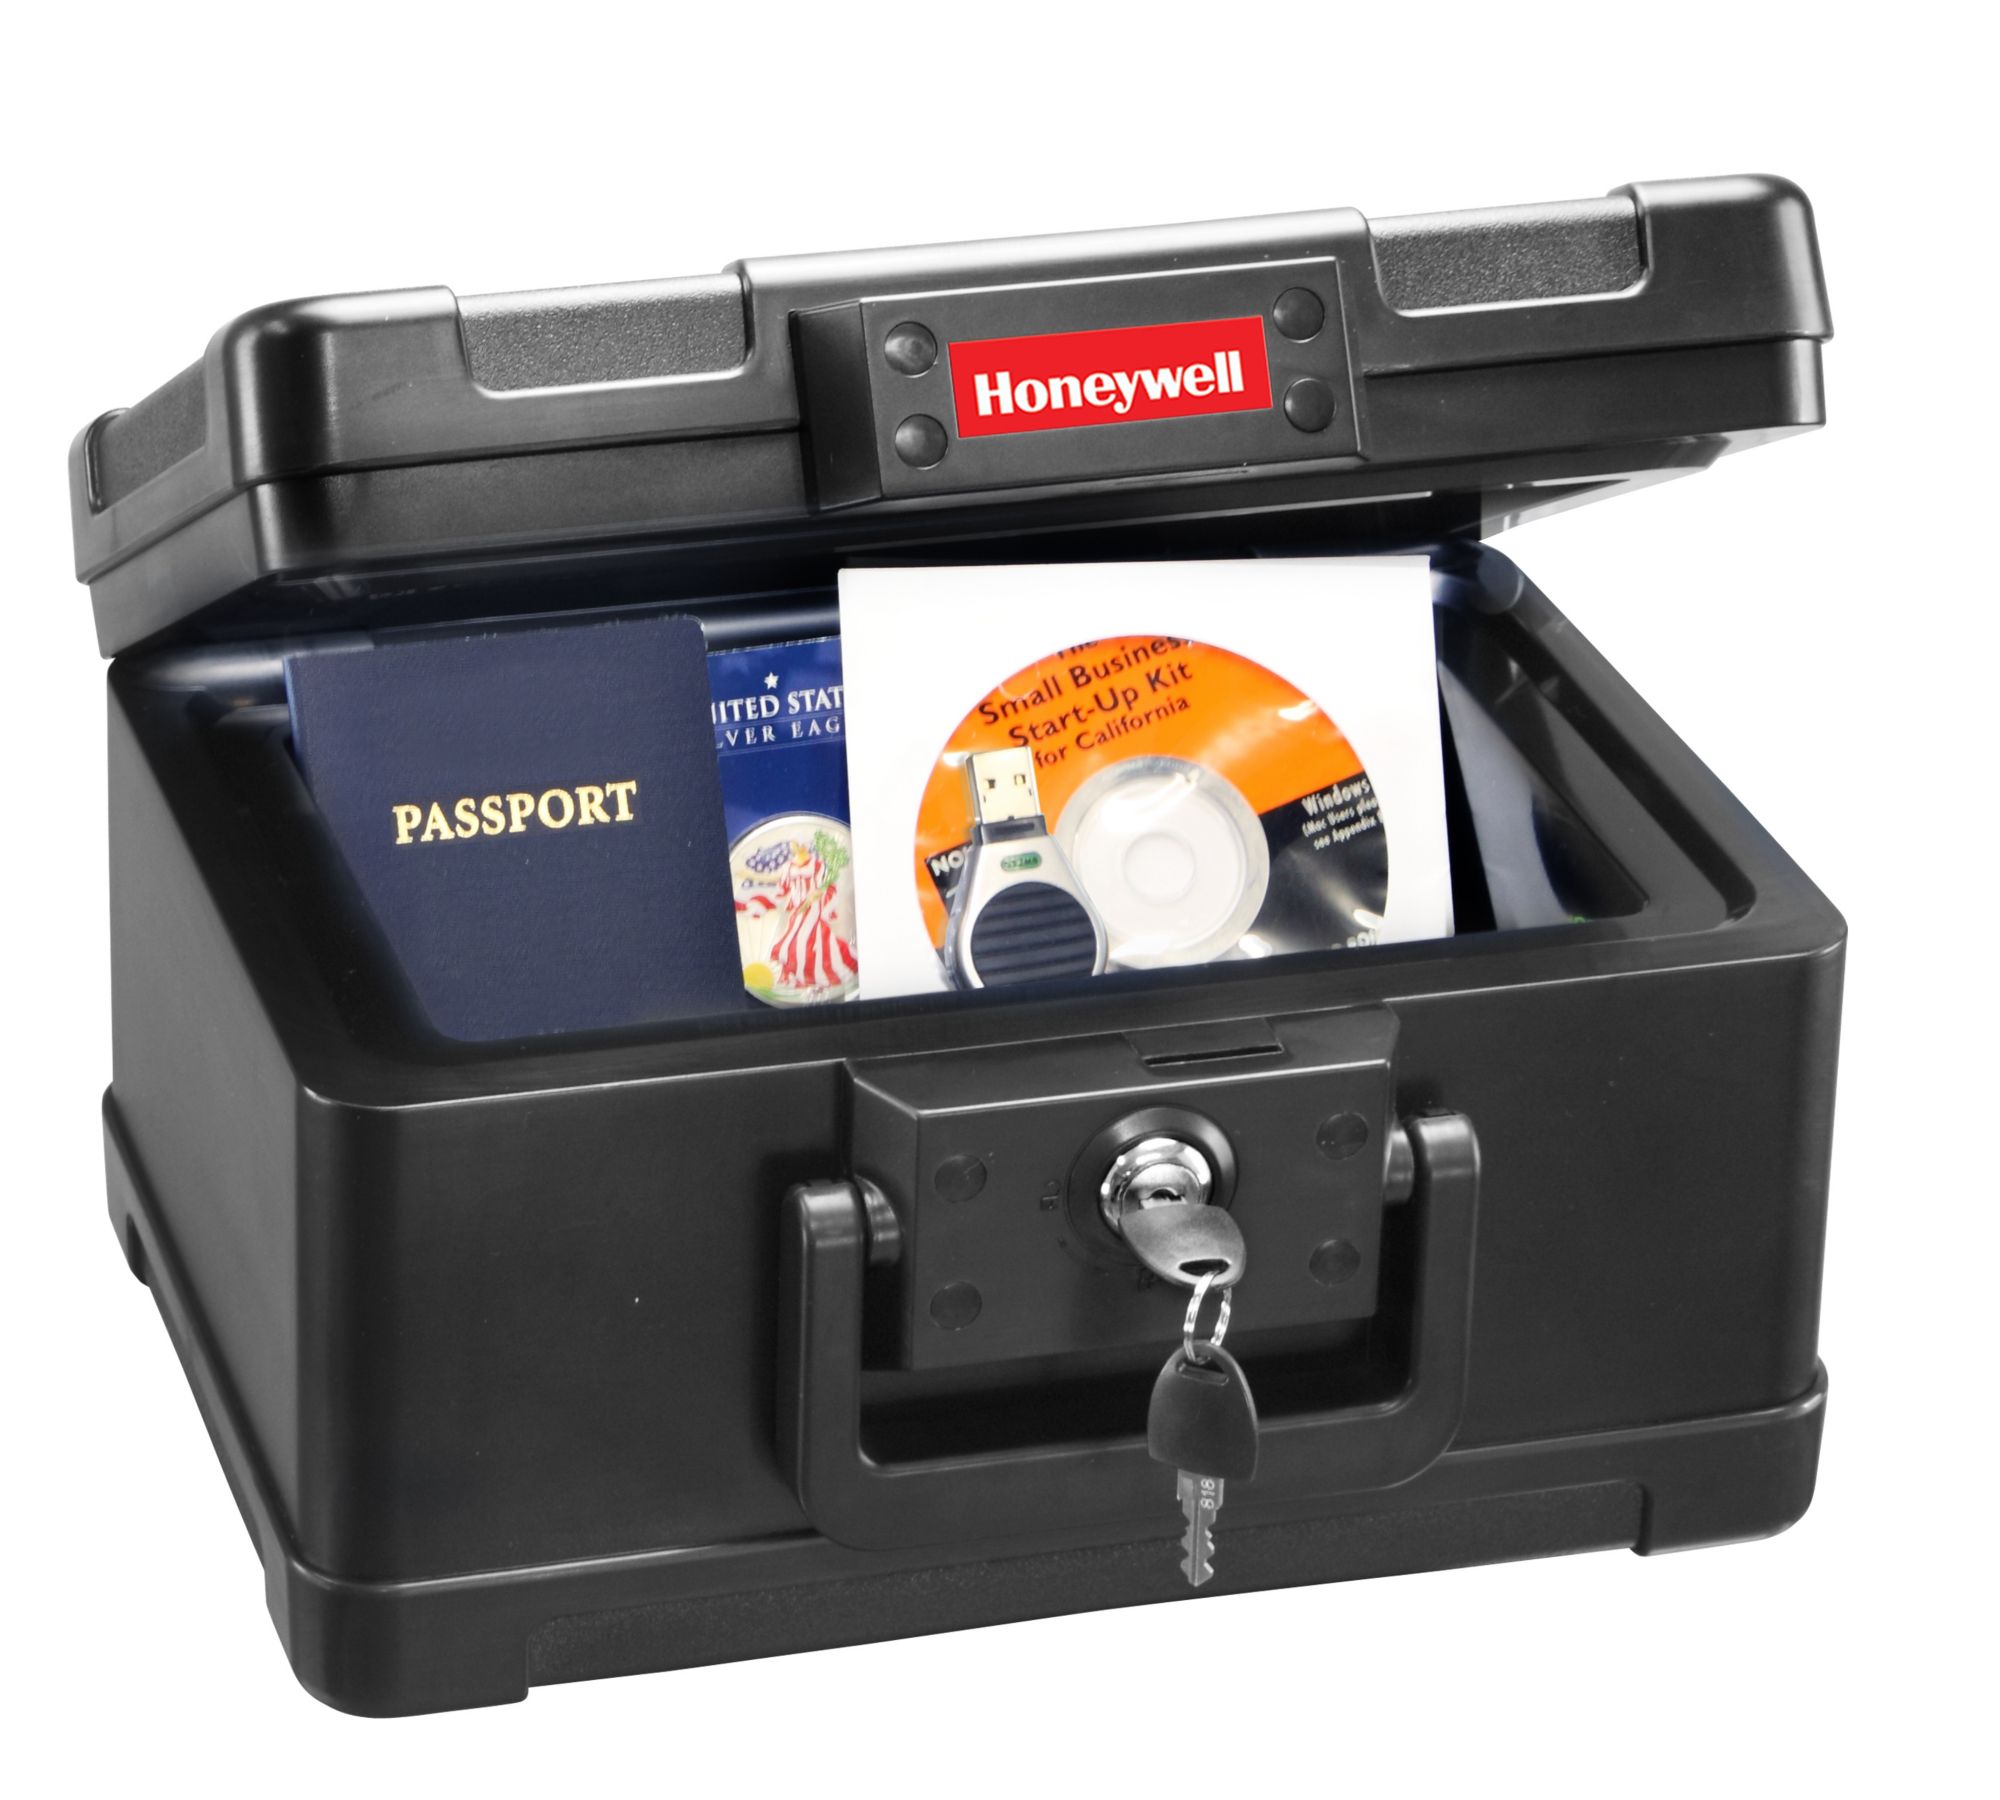 Honeywell 0.15-Cu.-Ft. Water-Resistant Fire Chest